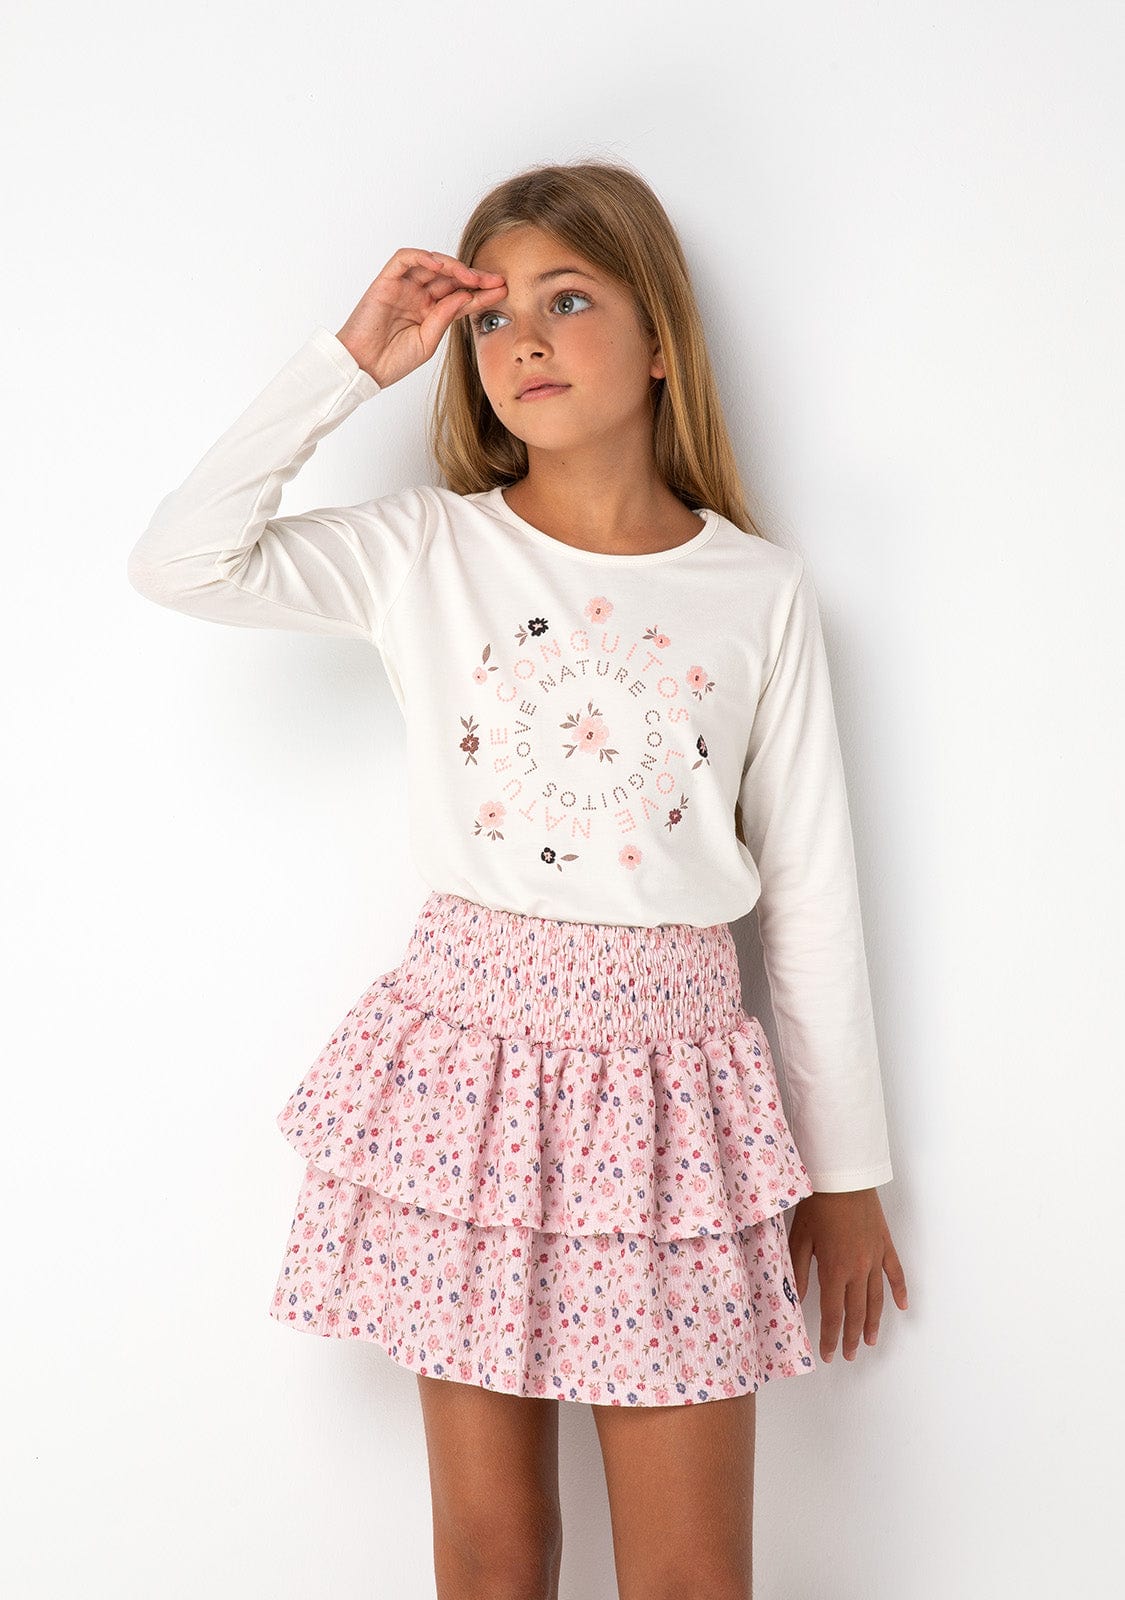 CONGUITOS TEXTIL Clothing Girl's Pink Print Flowers Skirt